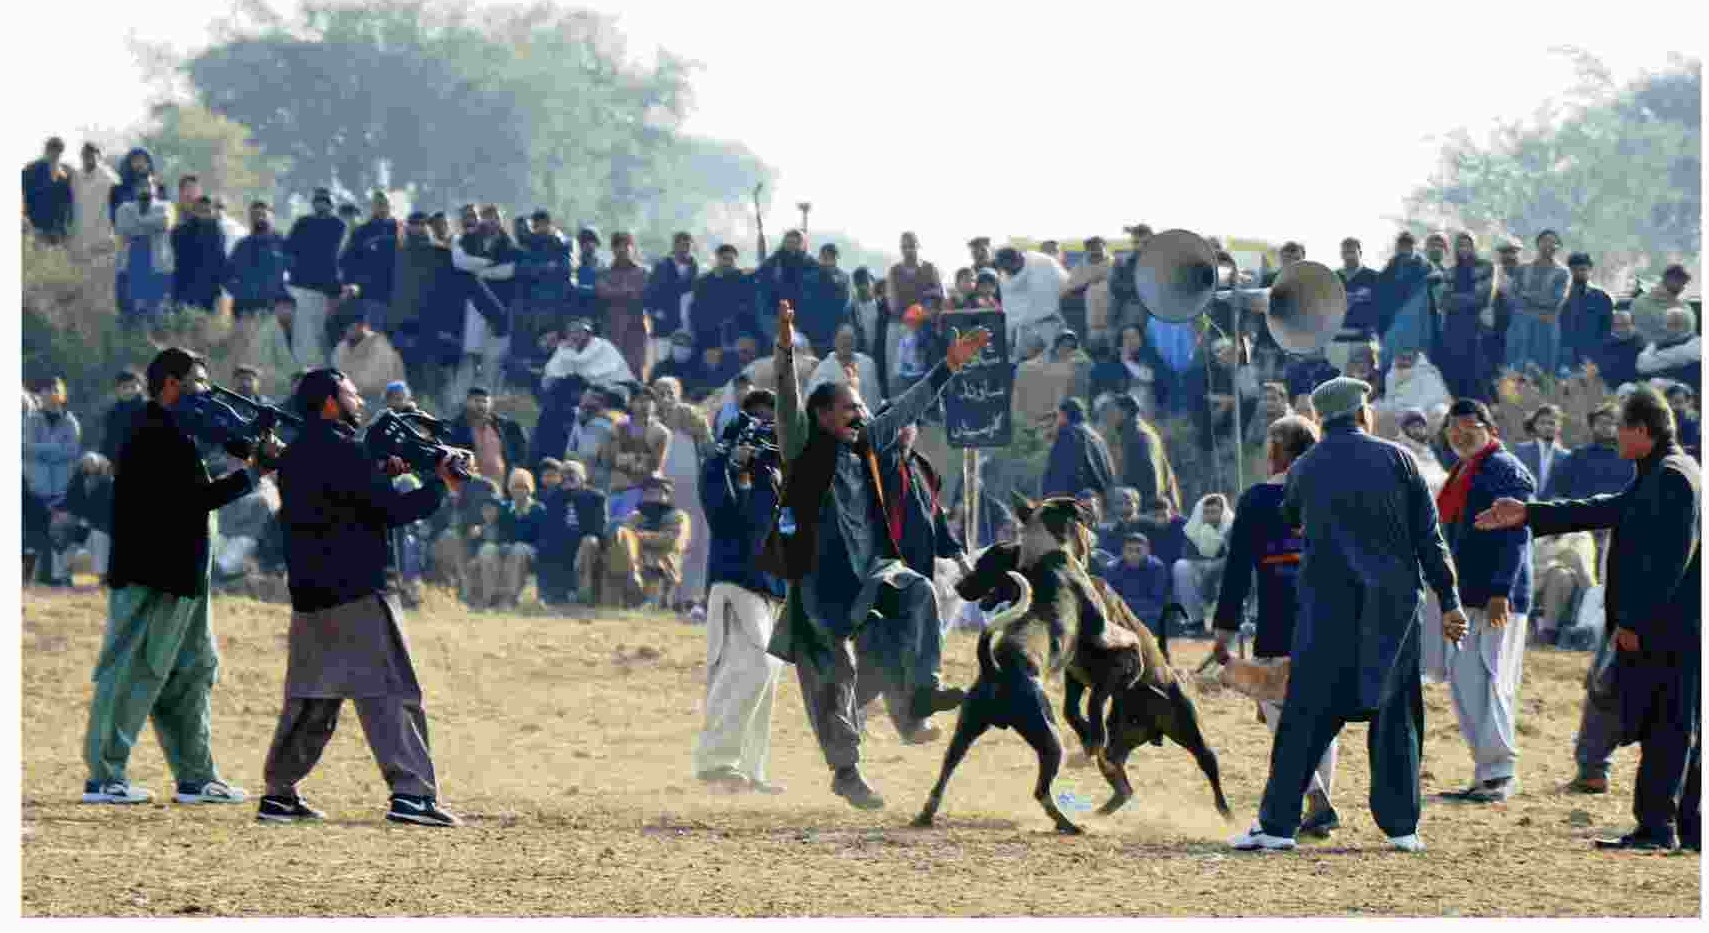 Dog fight in village - Dog fighting competition